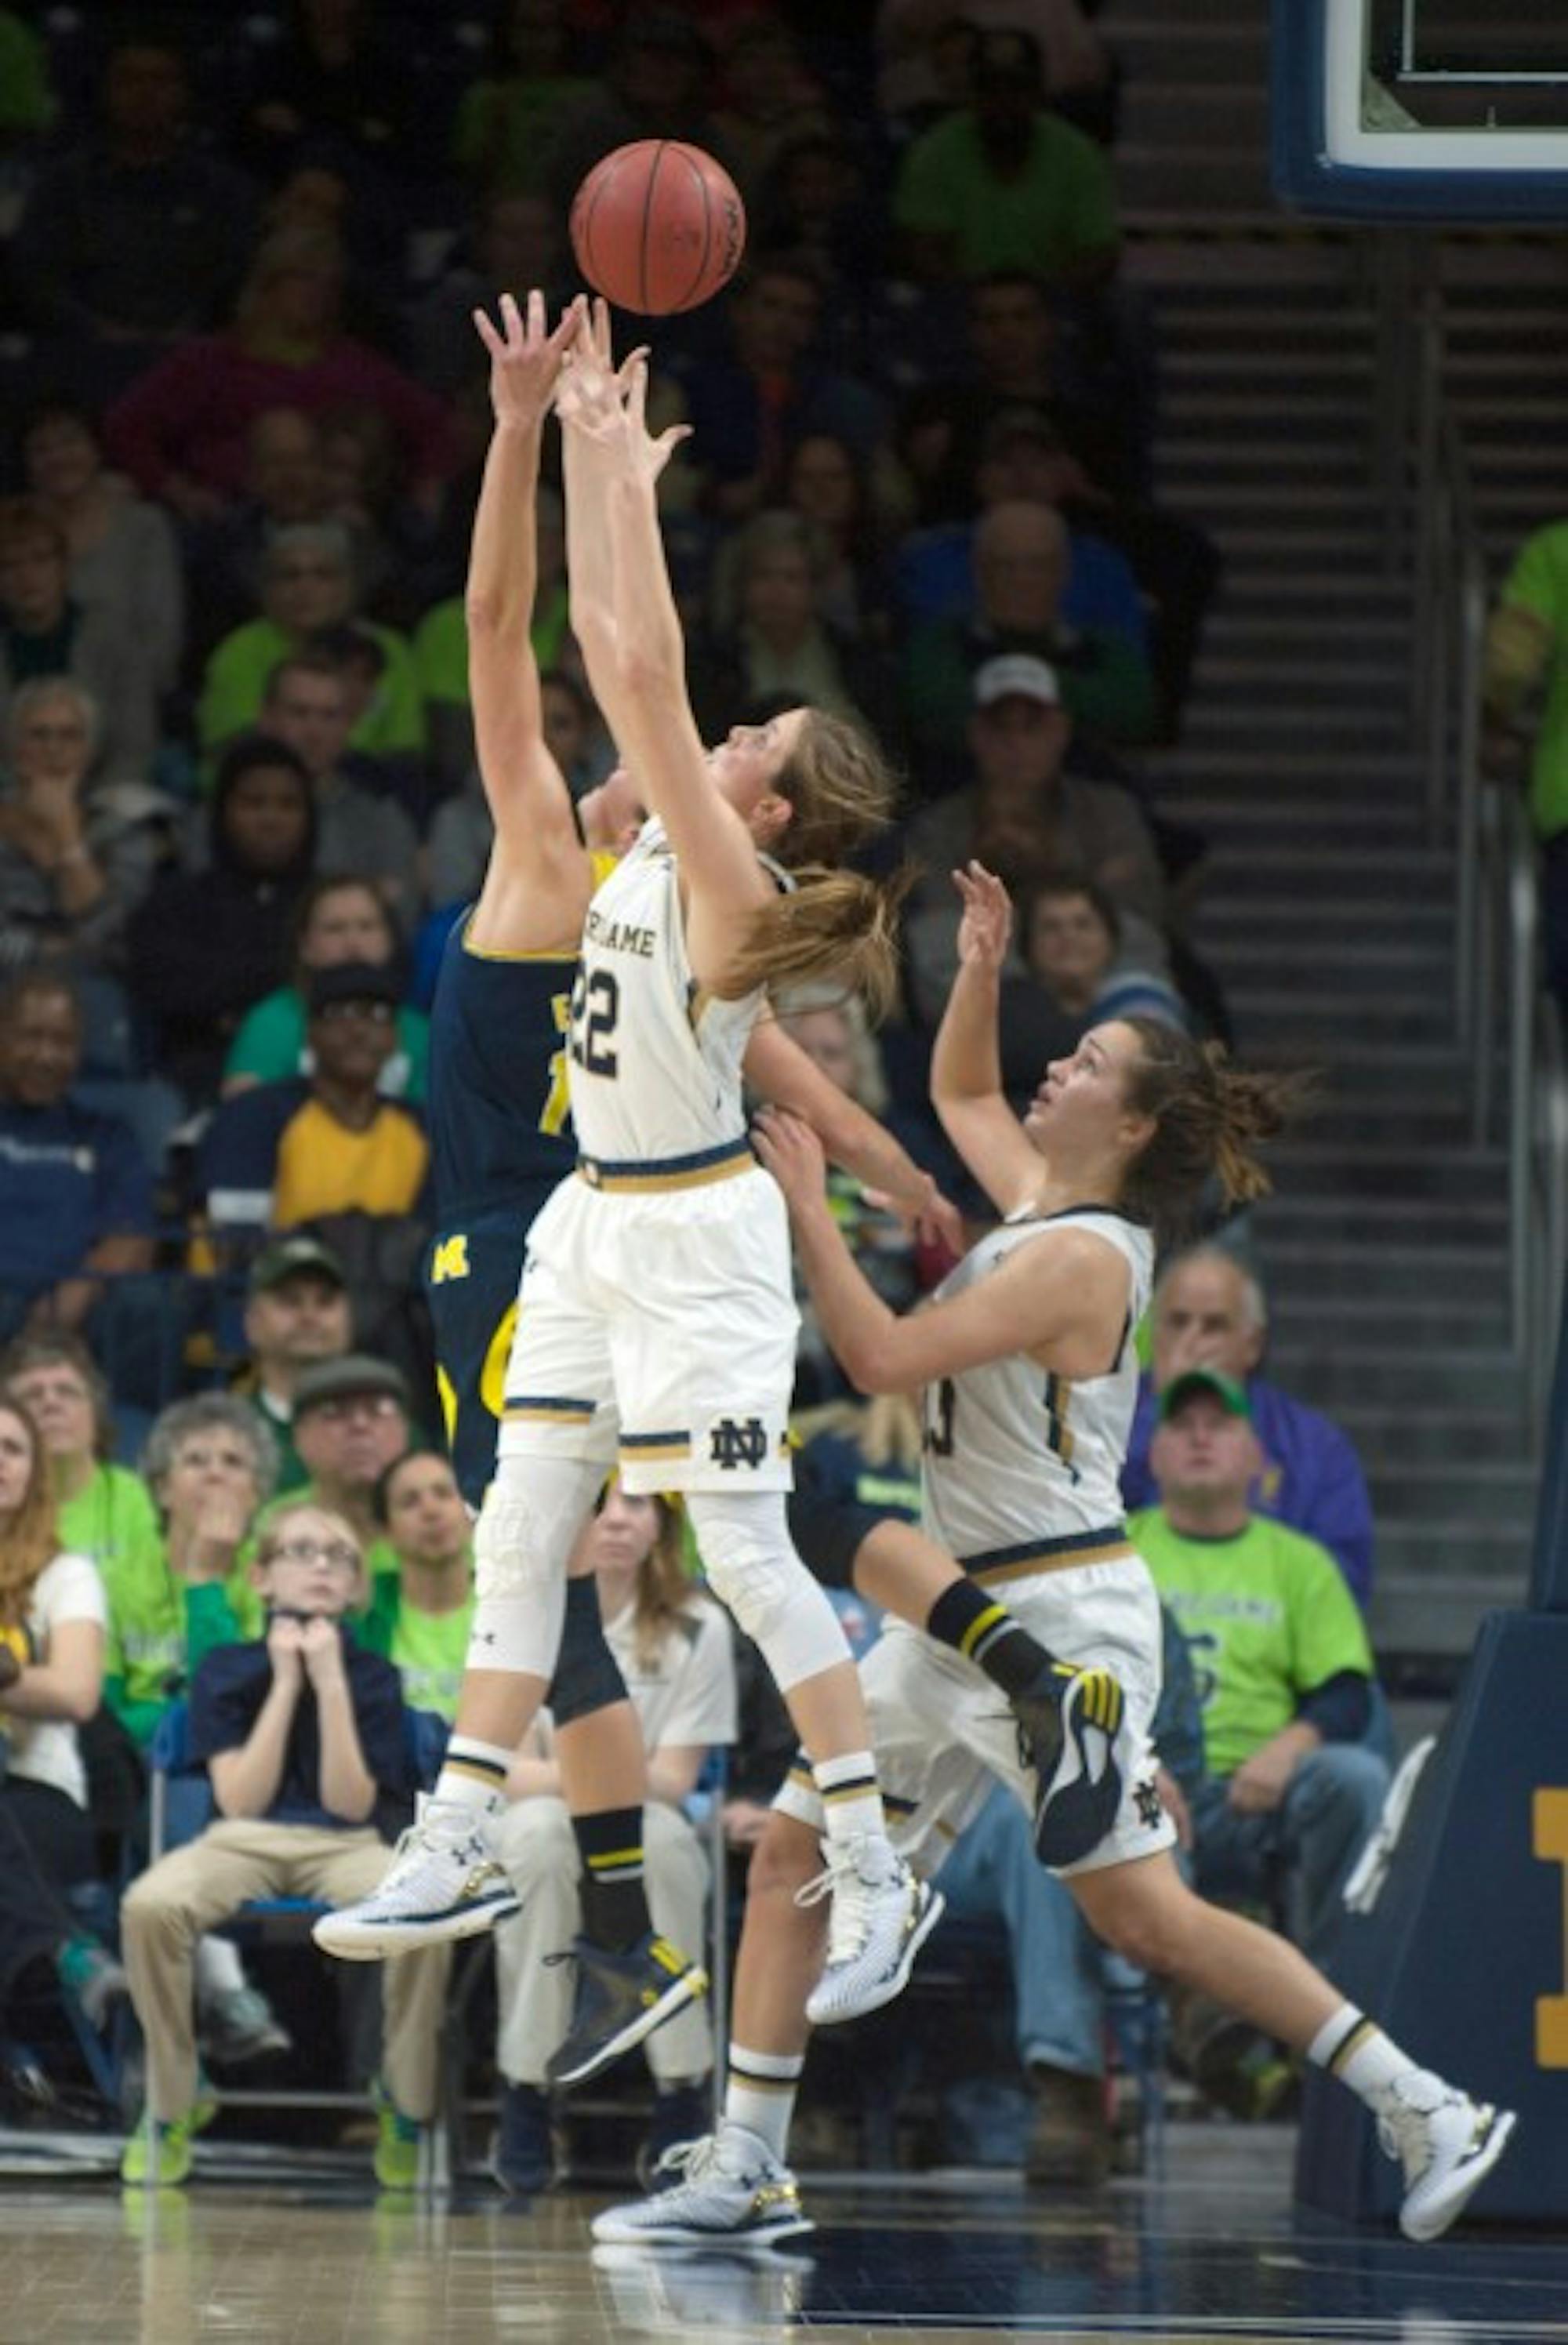 Irish senior guard Madison Cable out-jumps a Michigan opponent for a loose ball during Notre Dame’s 70-50 win Dec. 13.